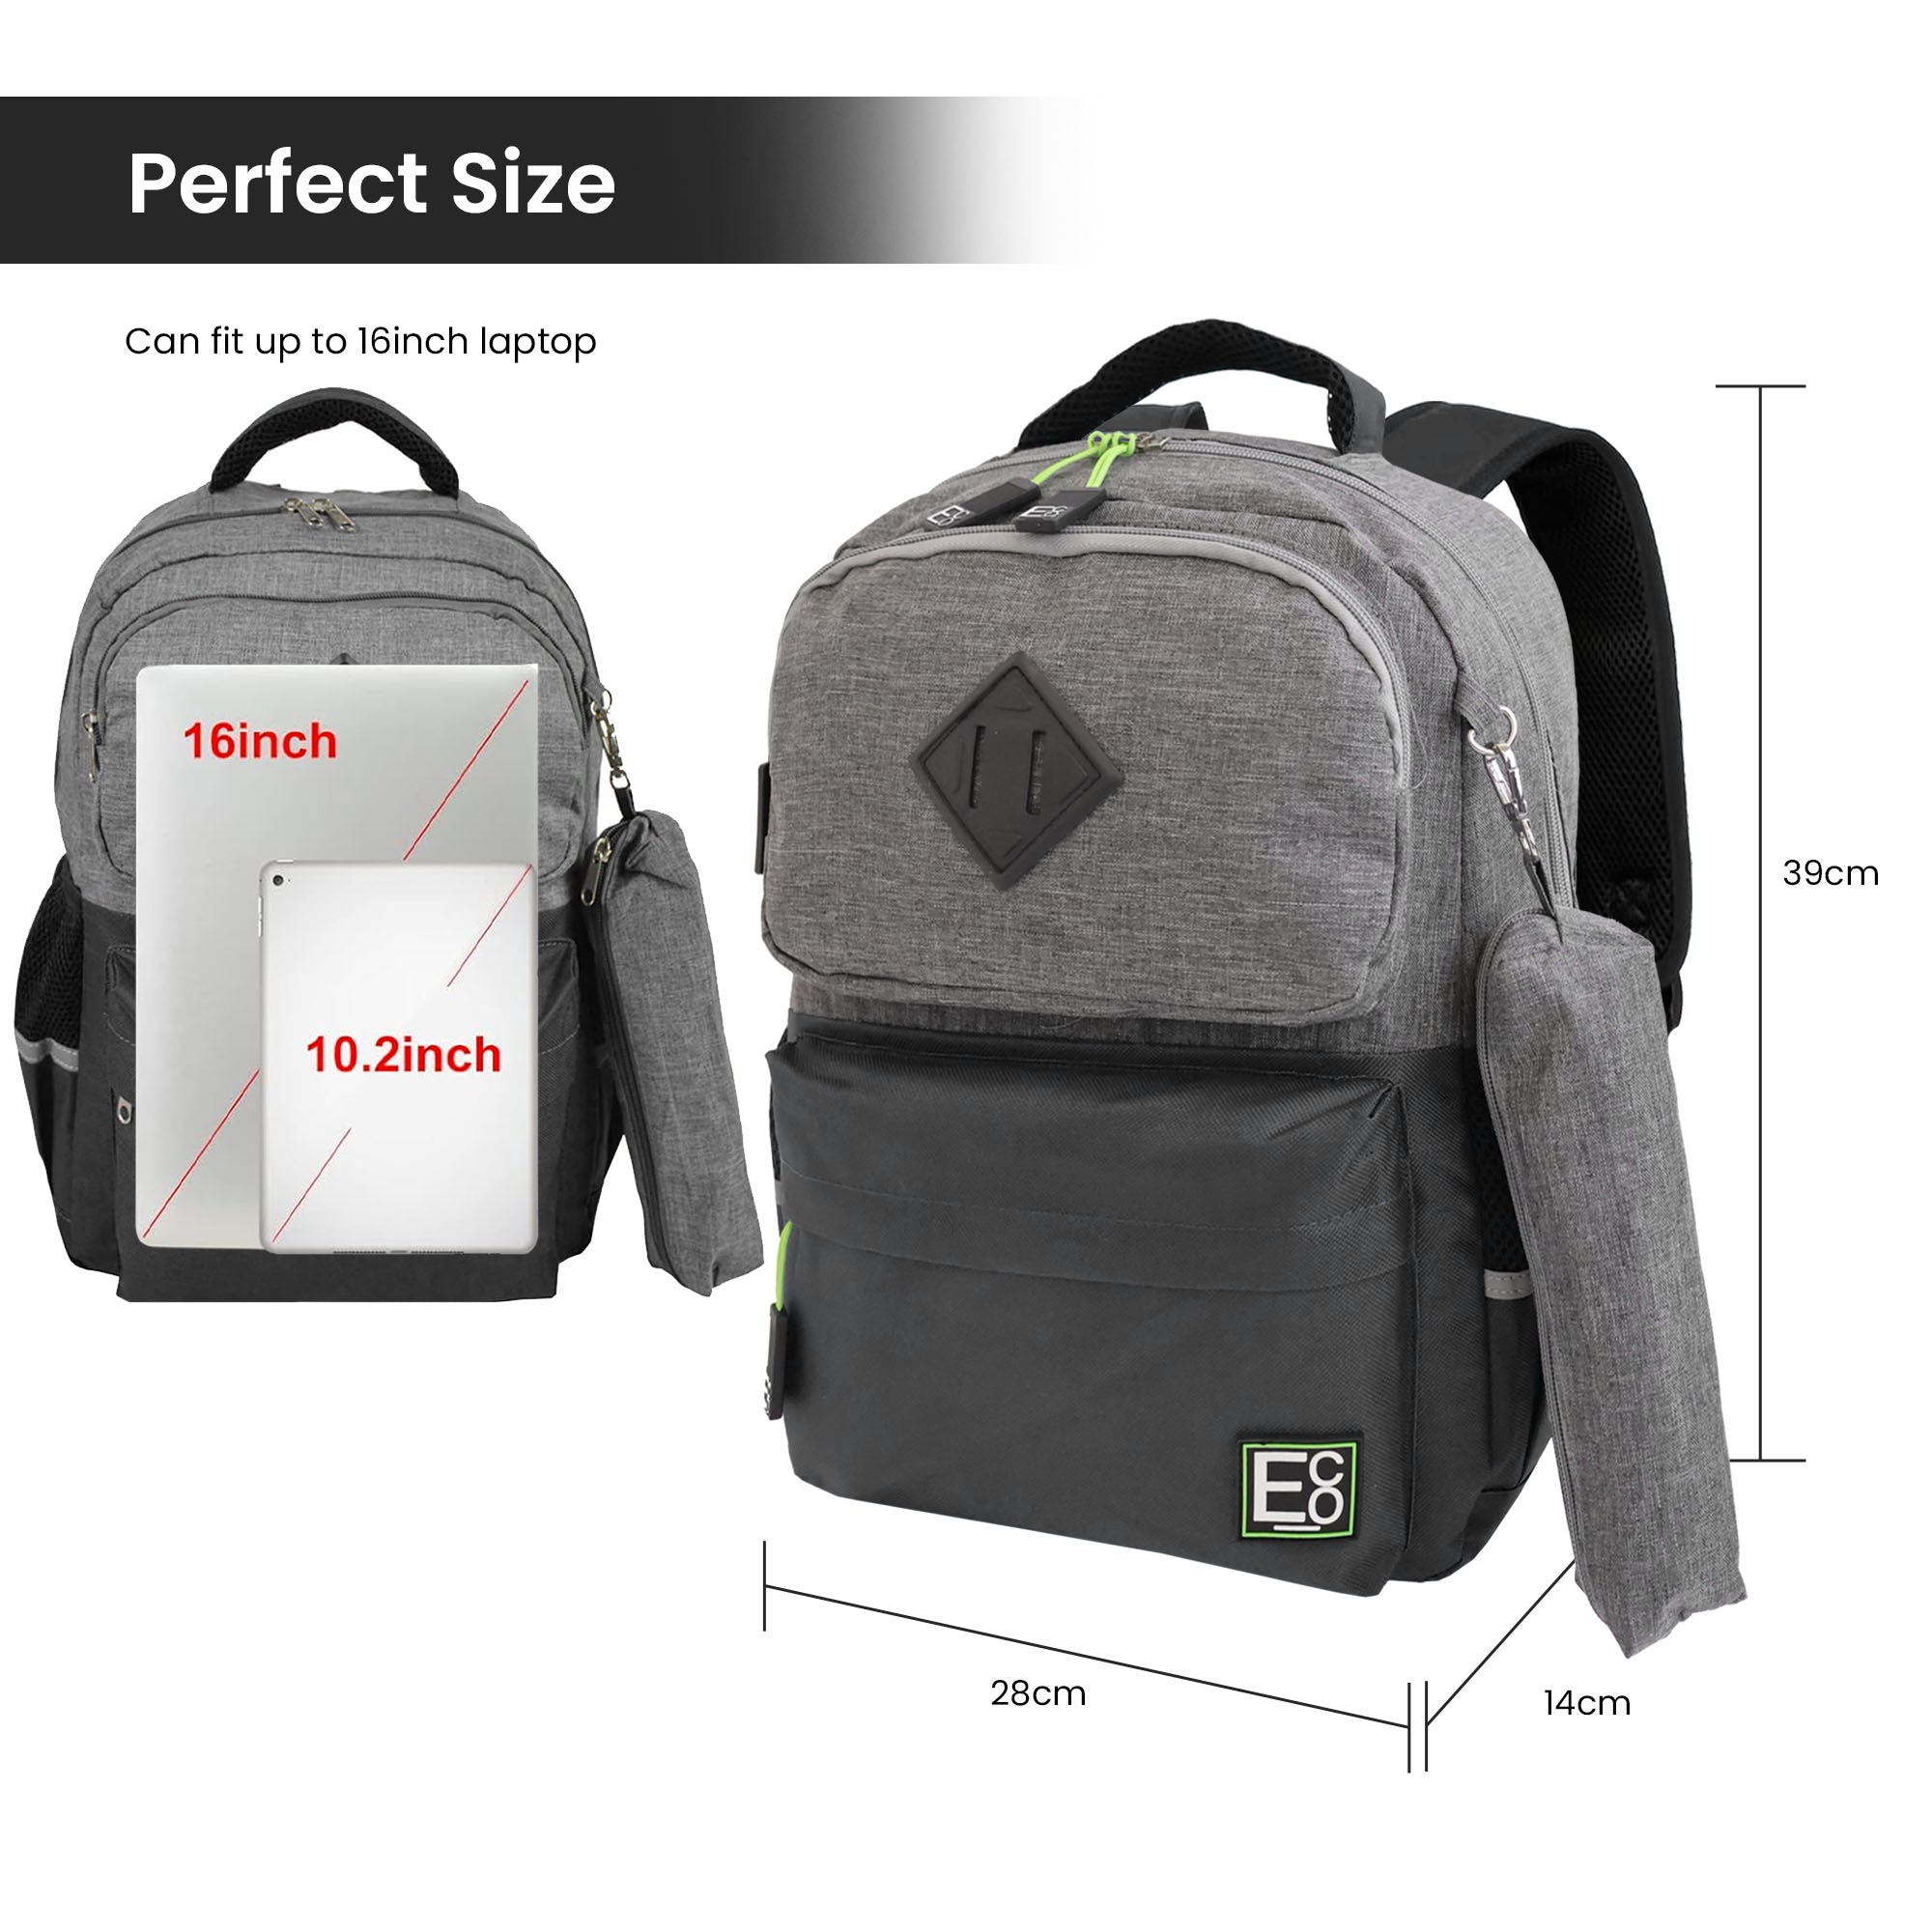 Student Backpack with Clip-on Pencil Case